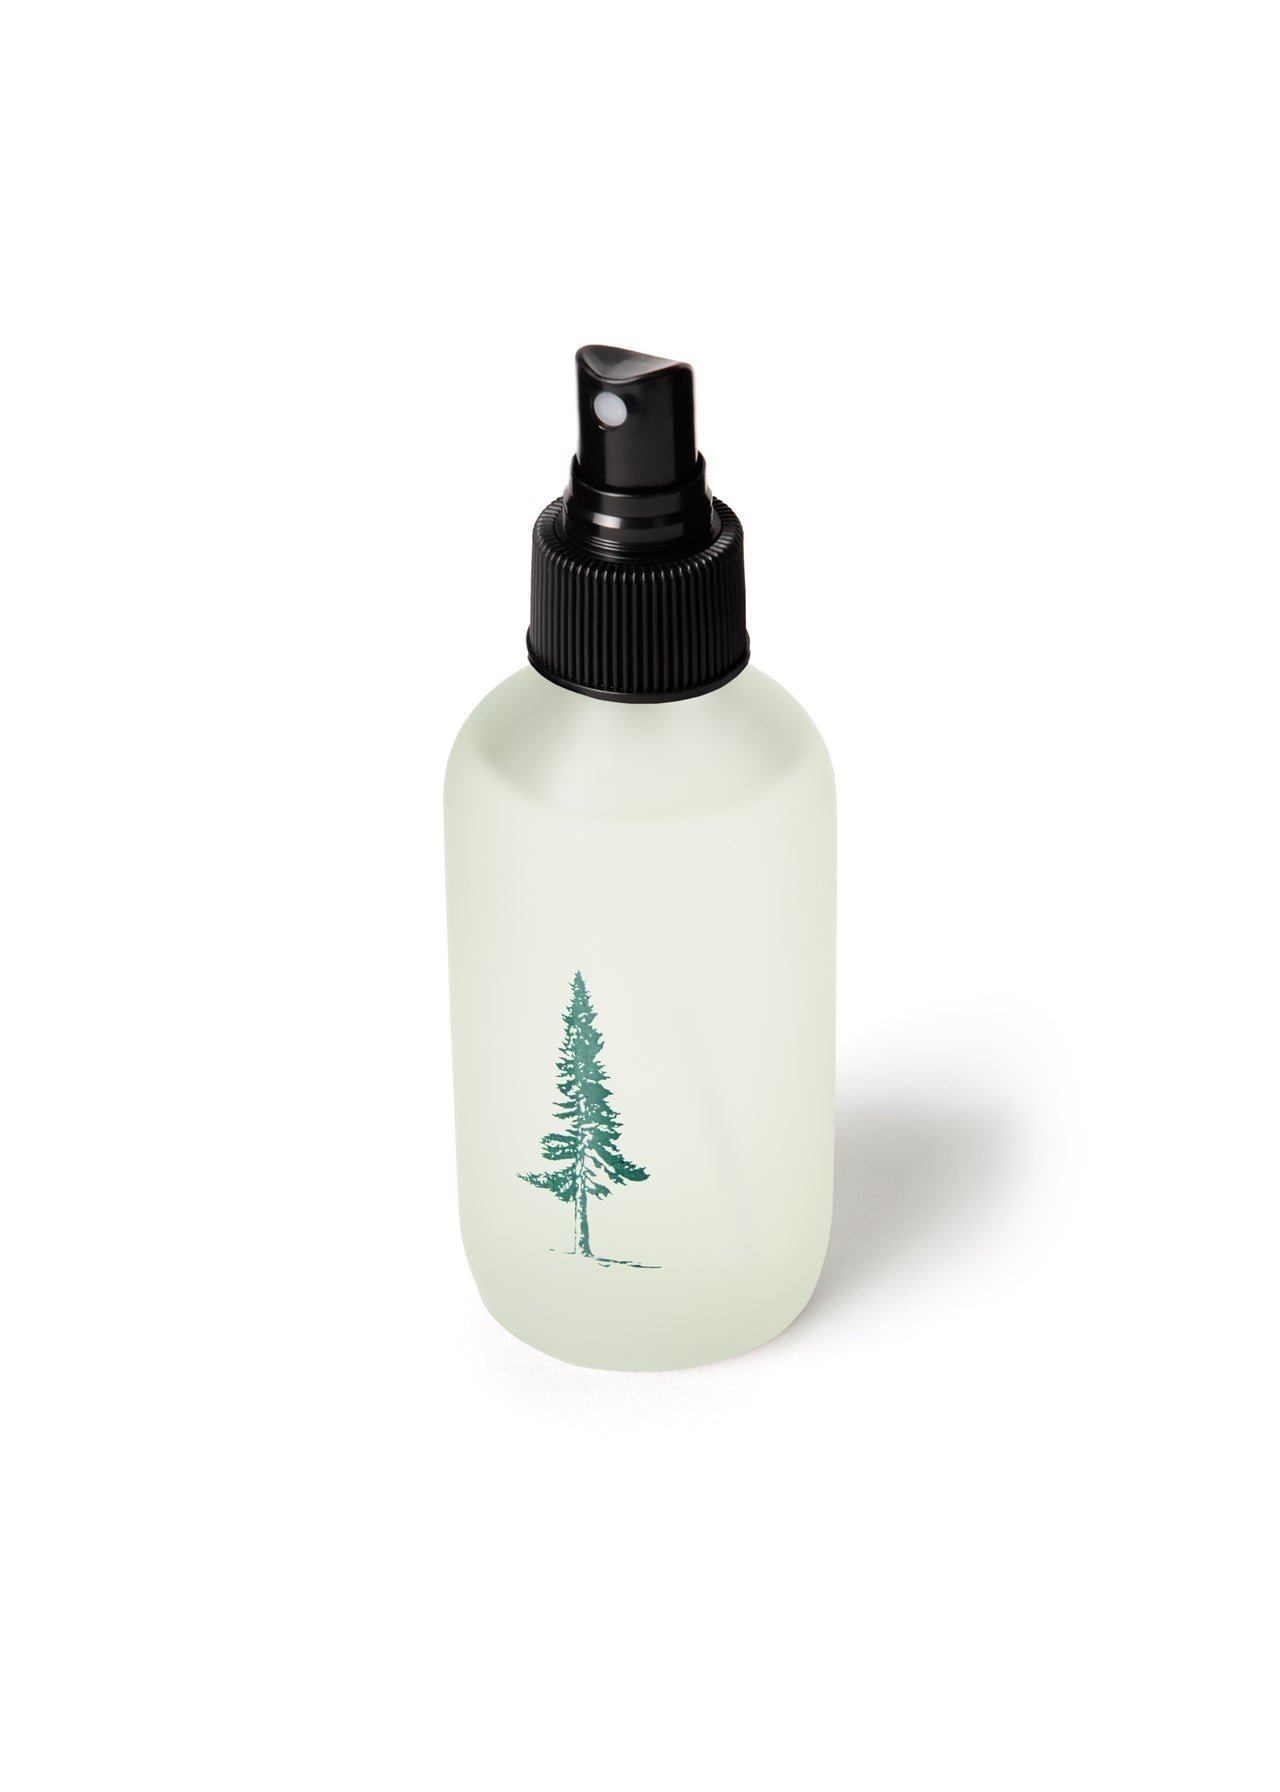 square trade goods' Great North Woods room spray